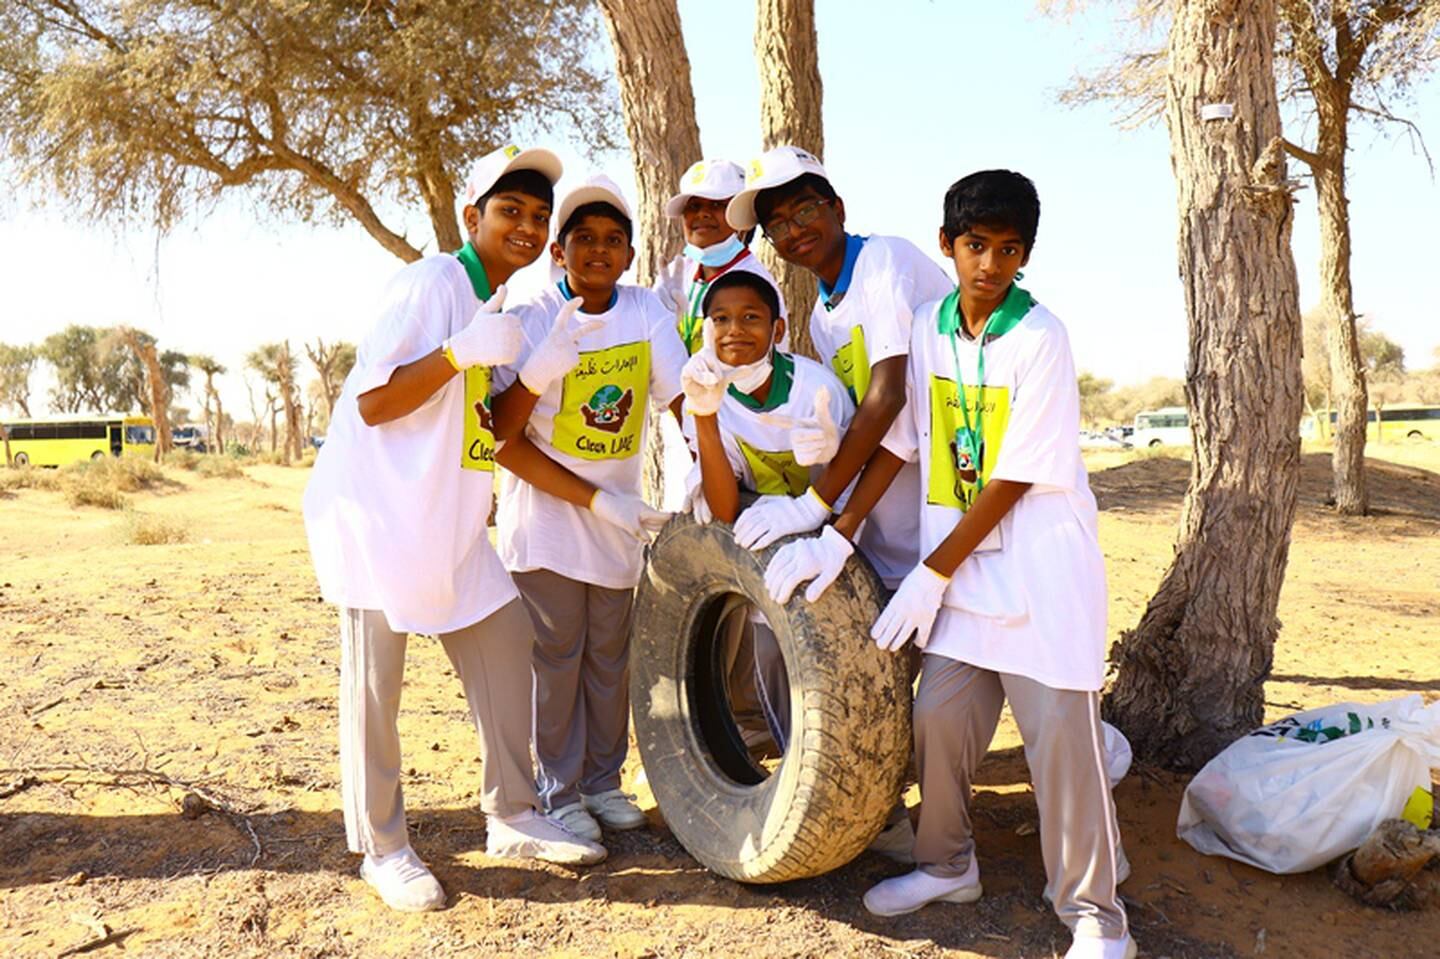 Volunteers of all ages took part in the clean-up initiative. Photo: Emirates Environmental Group